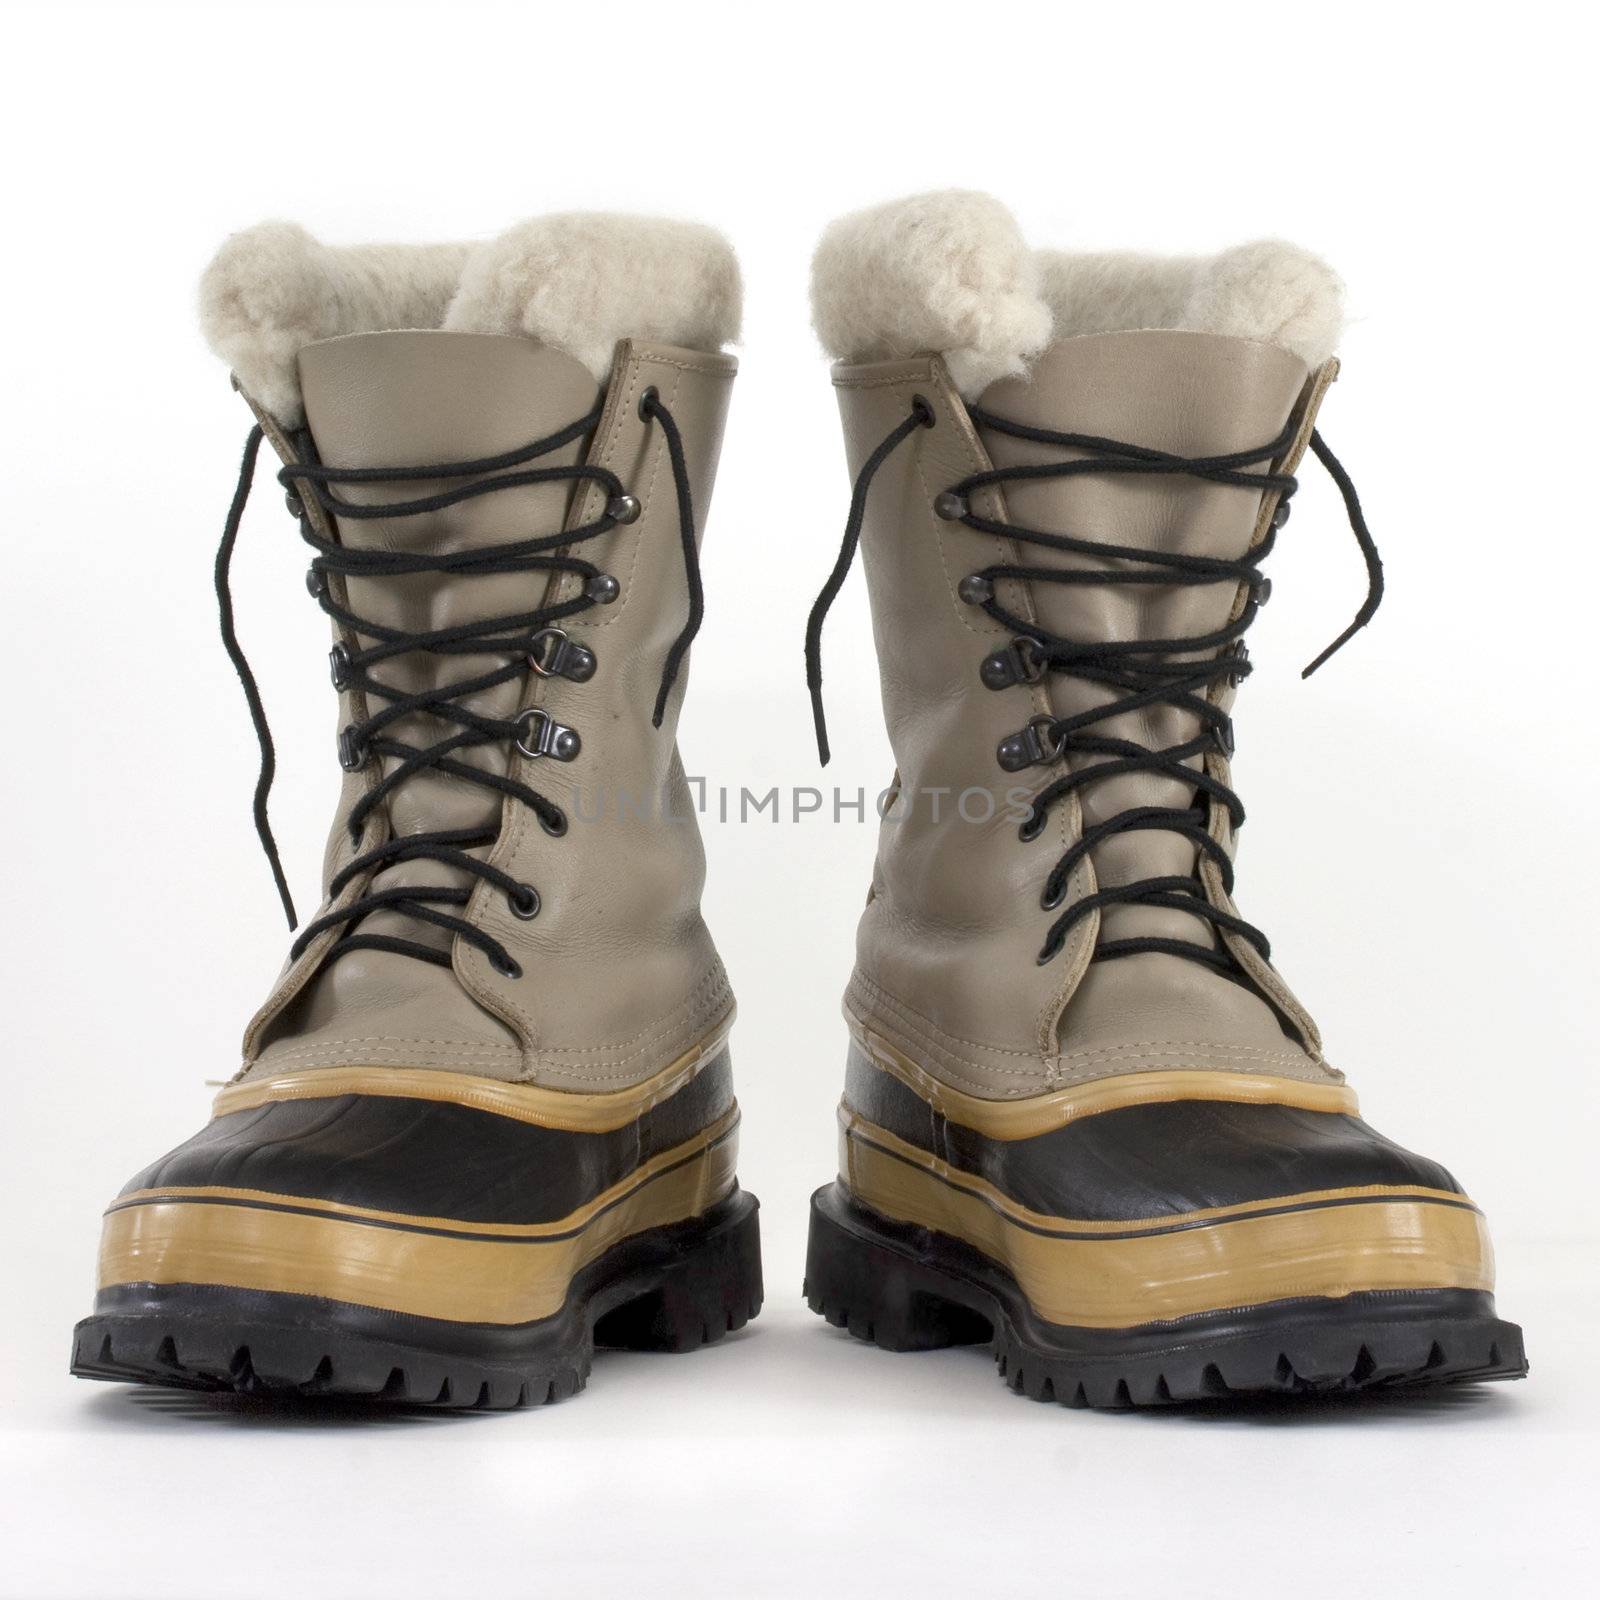 heavy snow boots by PixelsAway